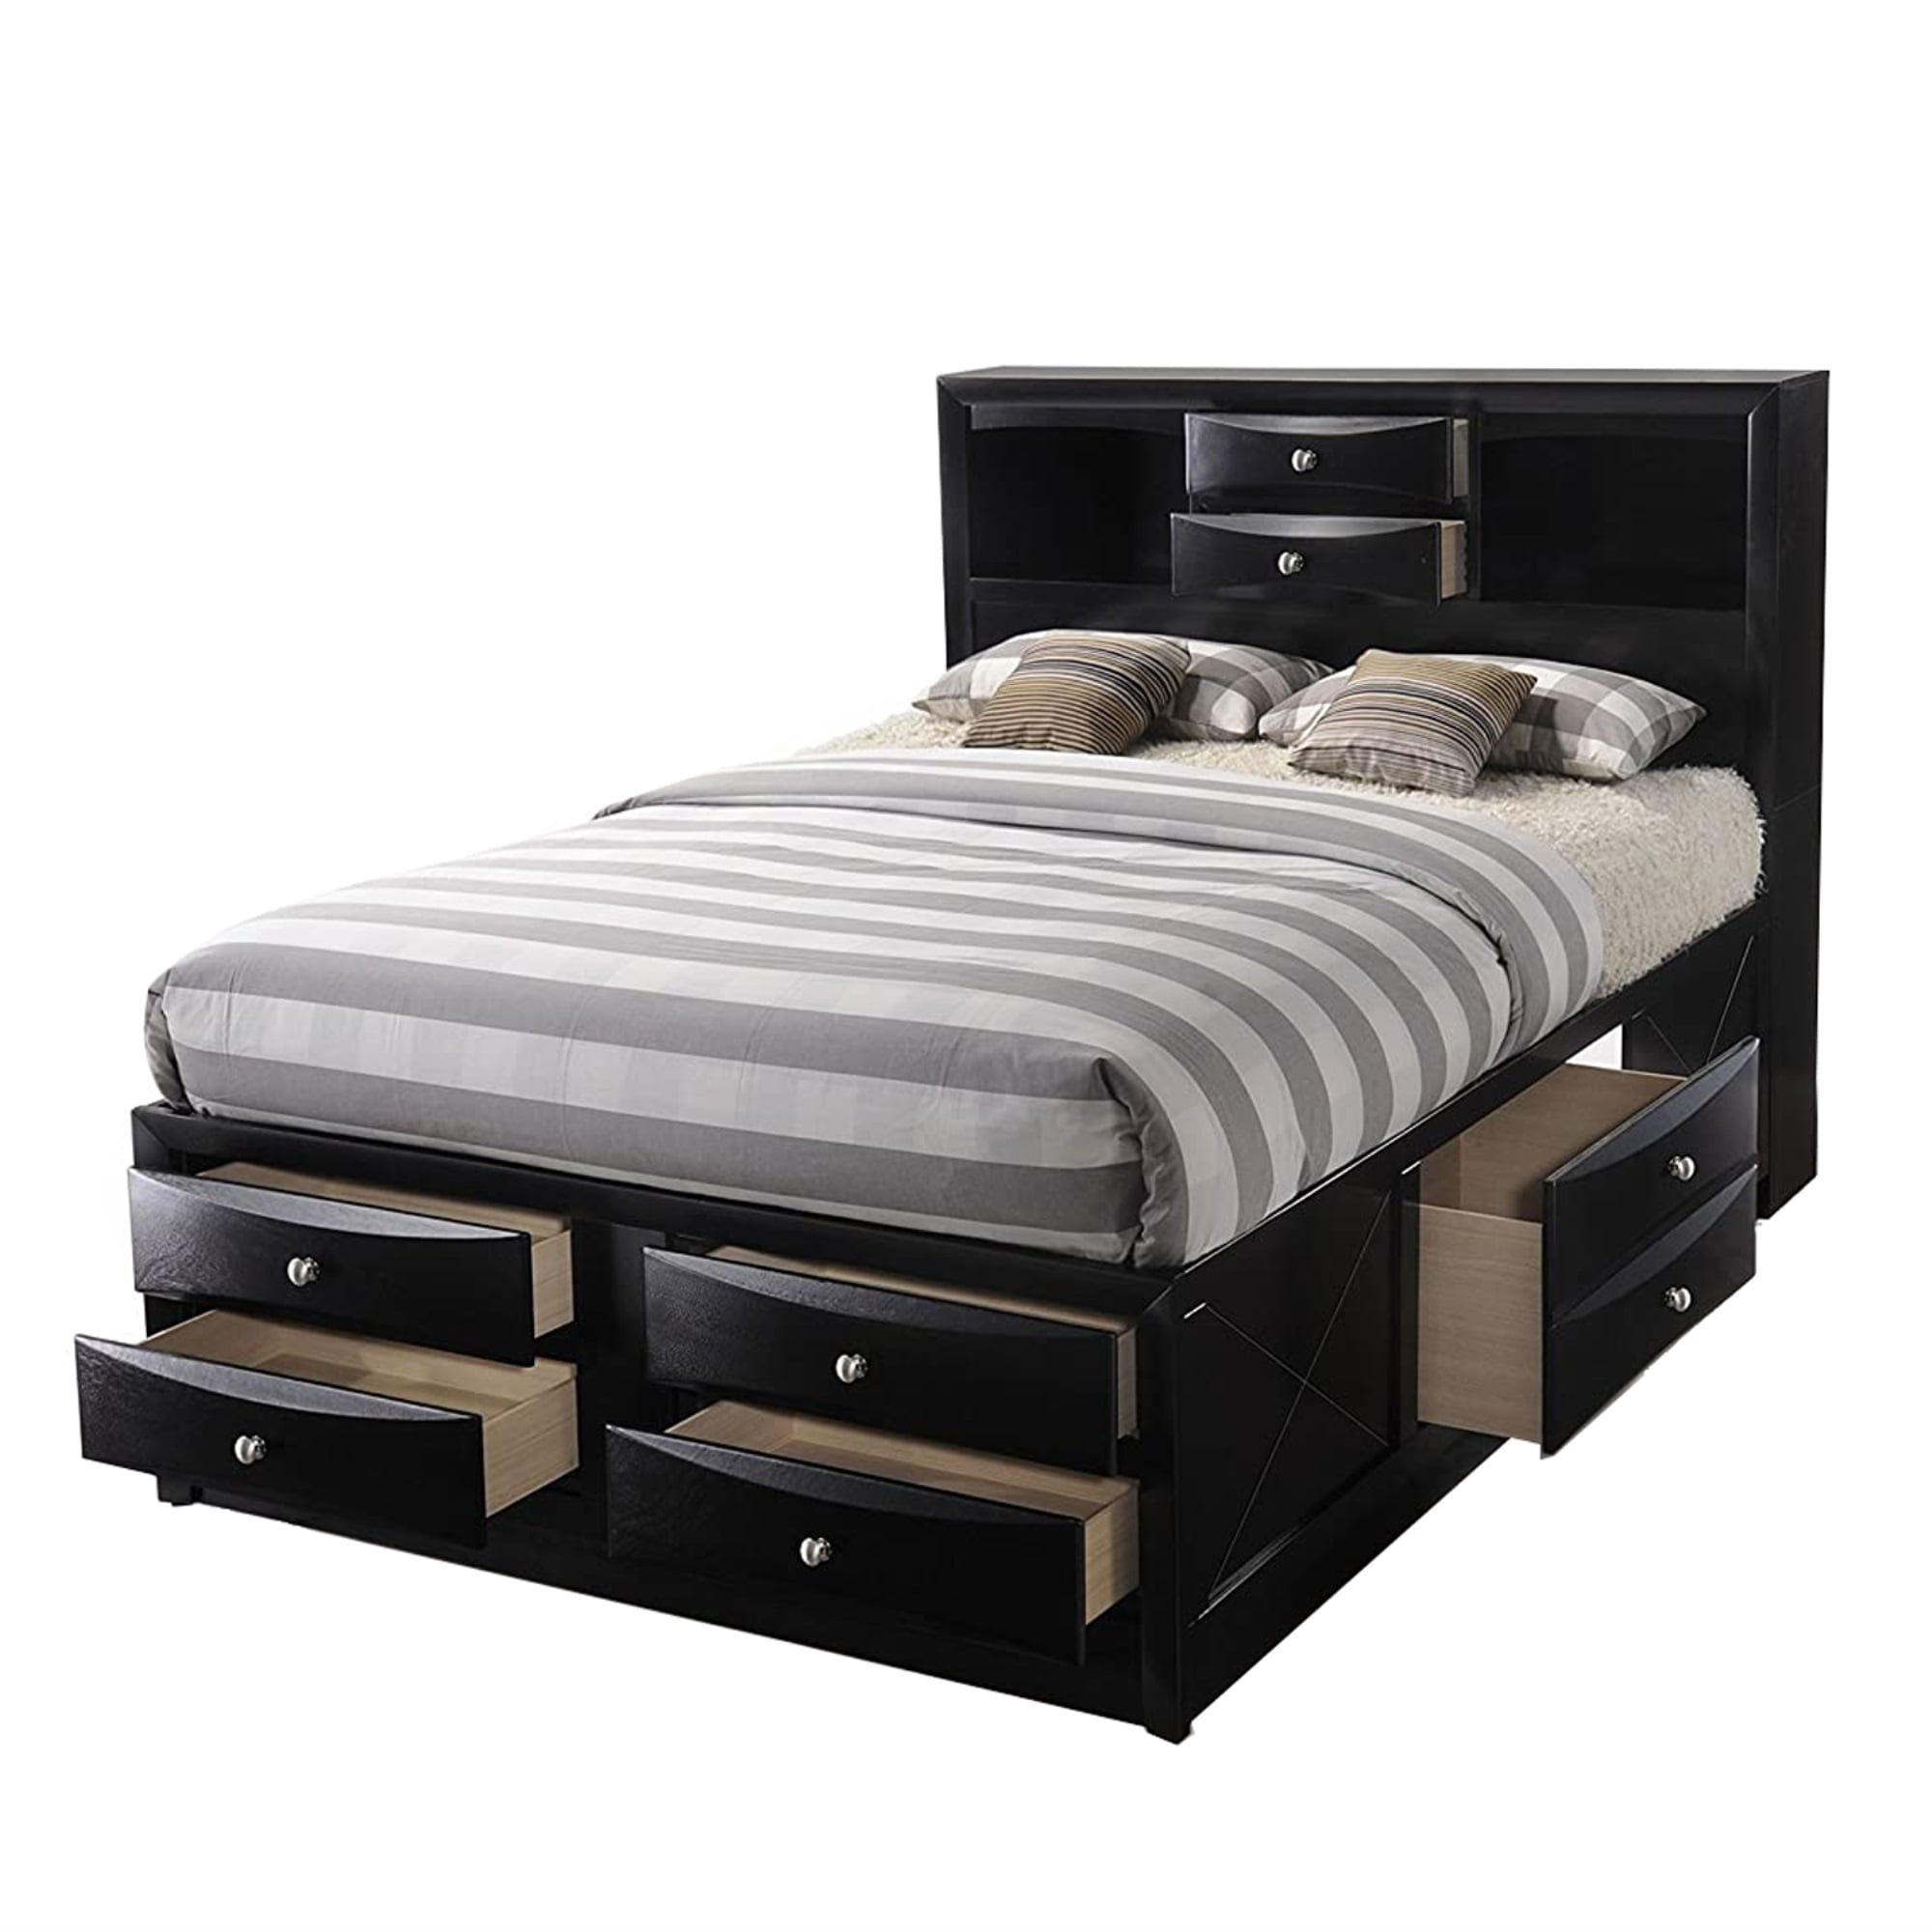 Eight Drawer Full Size Storage Bed With, King Bed Bookcase Headboard Storage